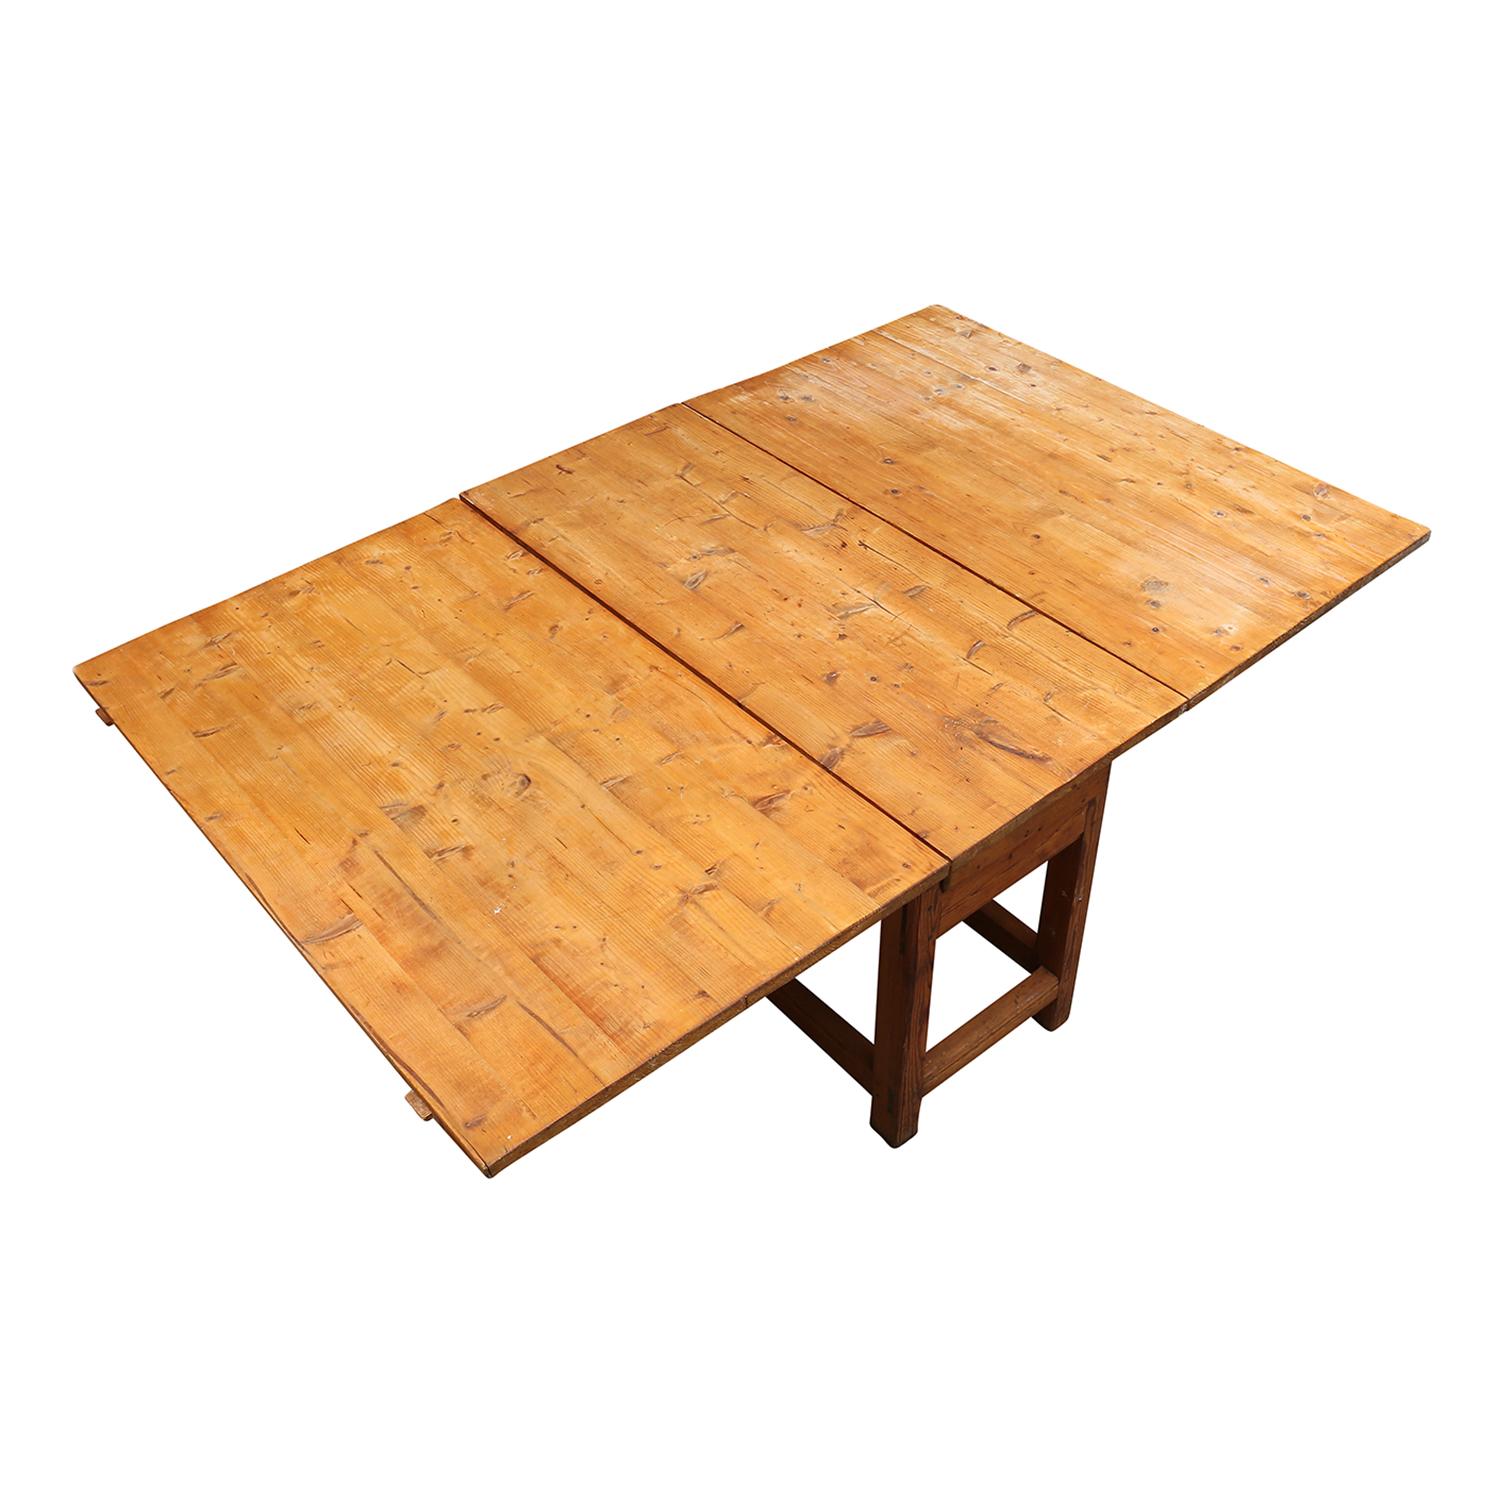 An antique Swedish Gustavian Slagbord, drop-leaf table with one drawer, made of hand crafted Pinewood in good condition. The Scandinavian dining room table is supported by four round wooden legs, each leaf folds up independently, supported by two